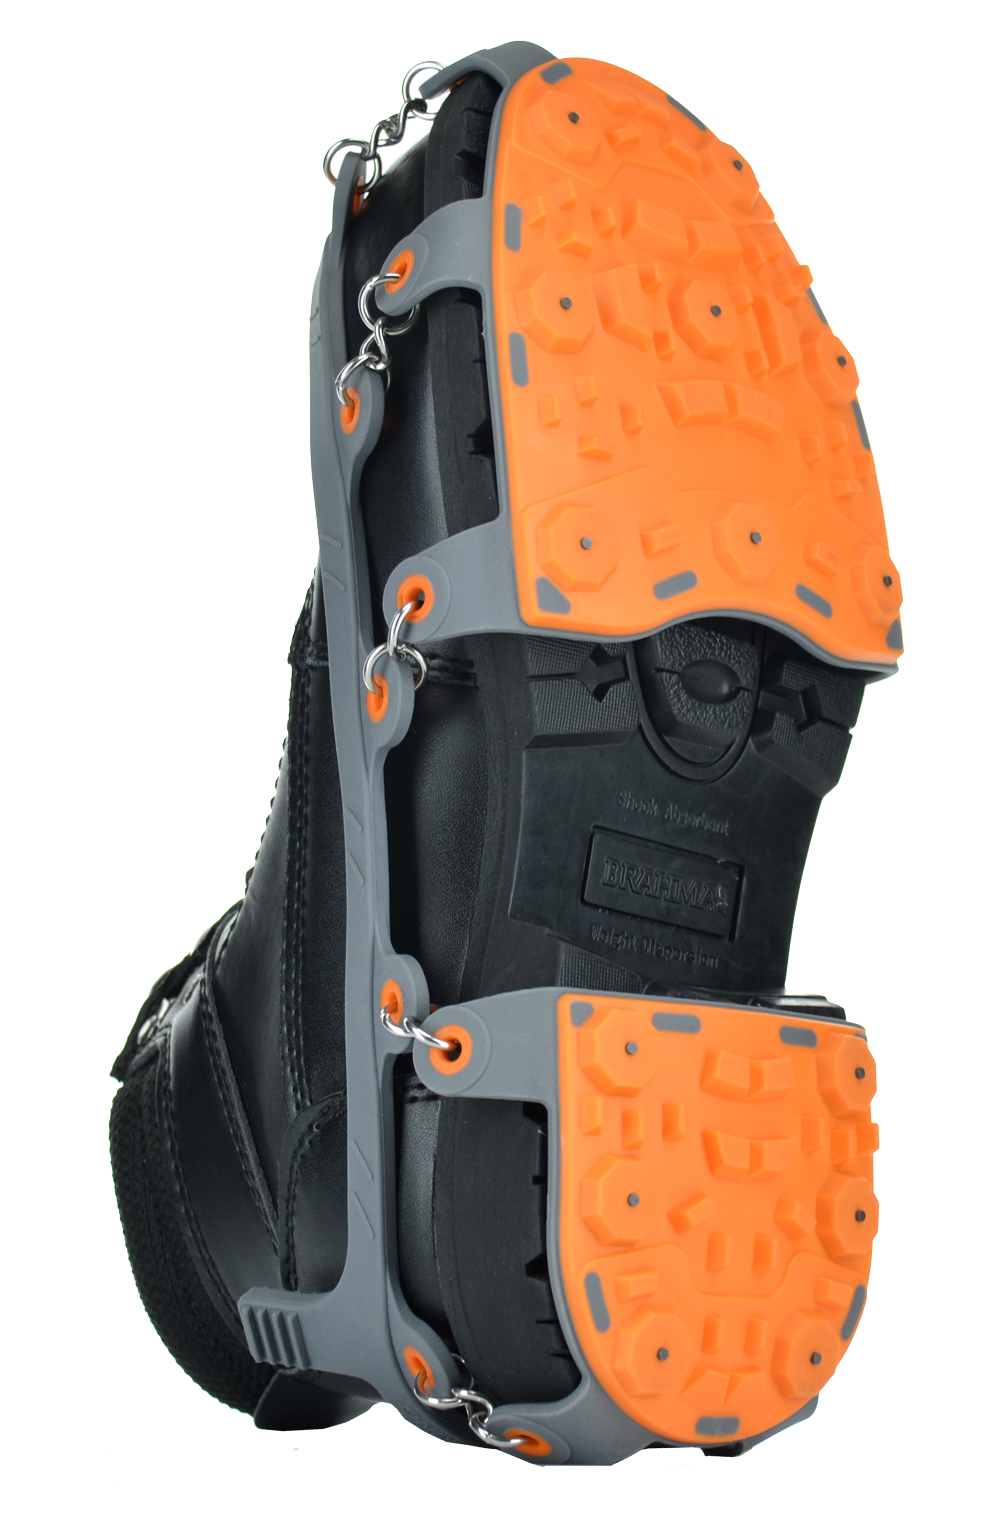 gris/orange Taille: LARGE ant... * NEW IN BOX * Hiver Walking JD6610 Low-Pro Ice crampons 